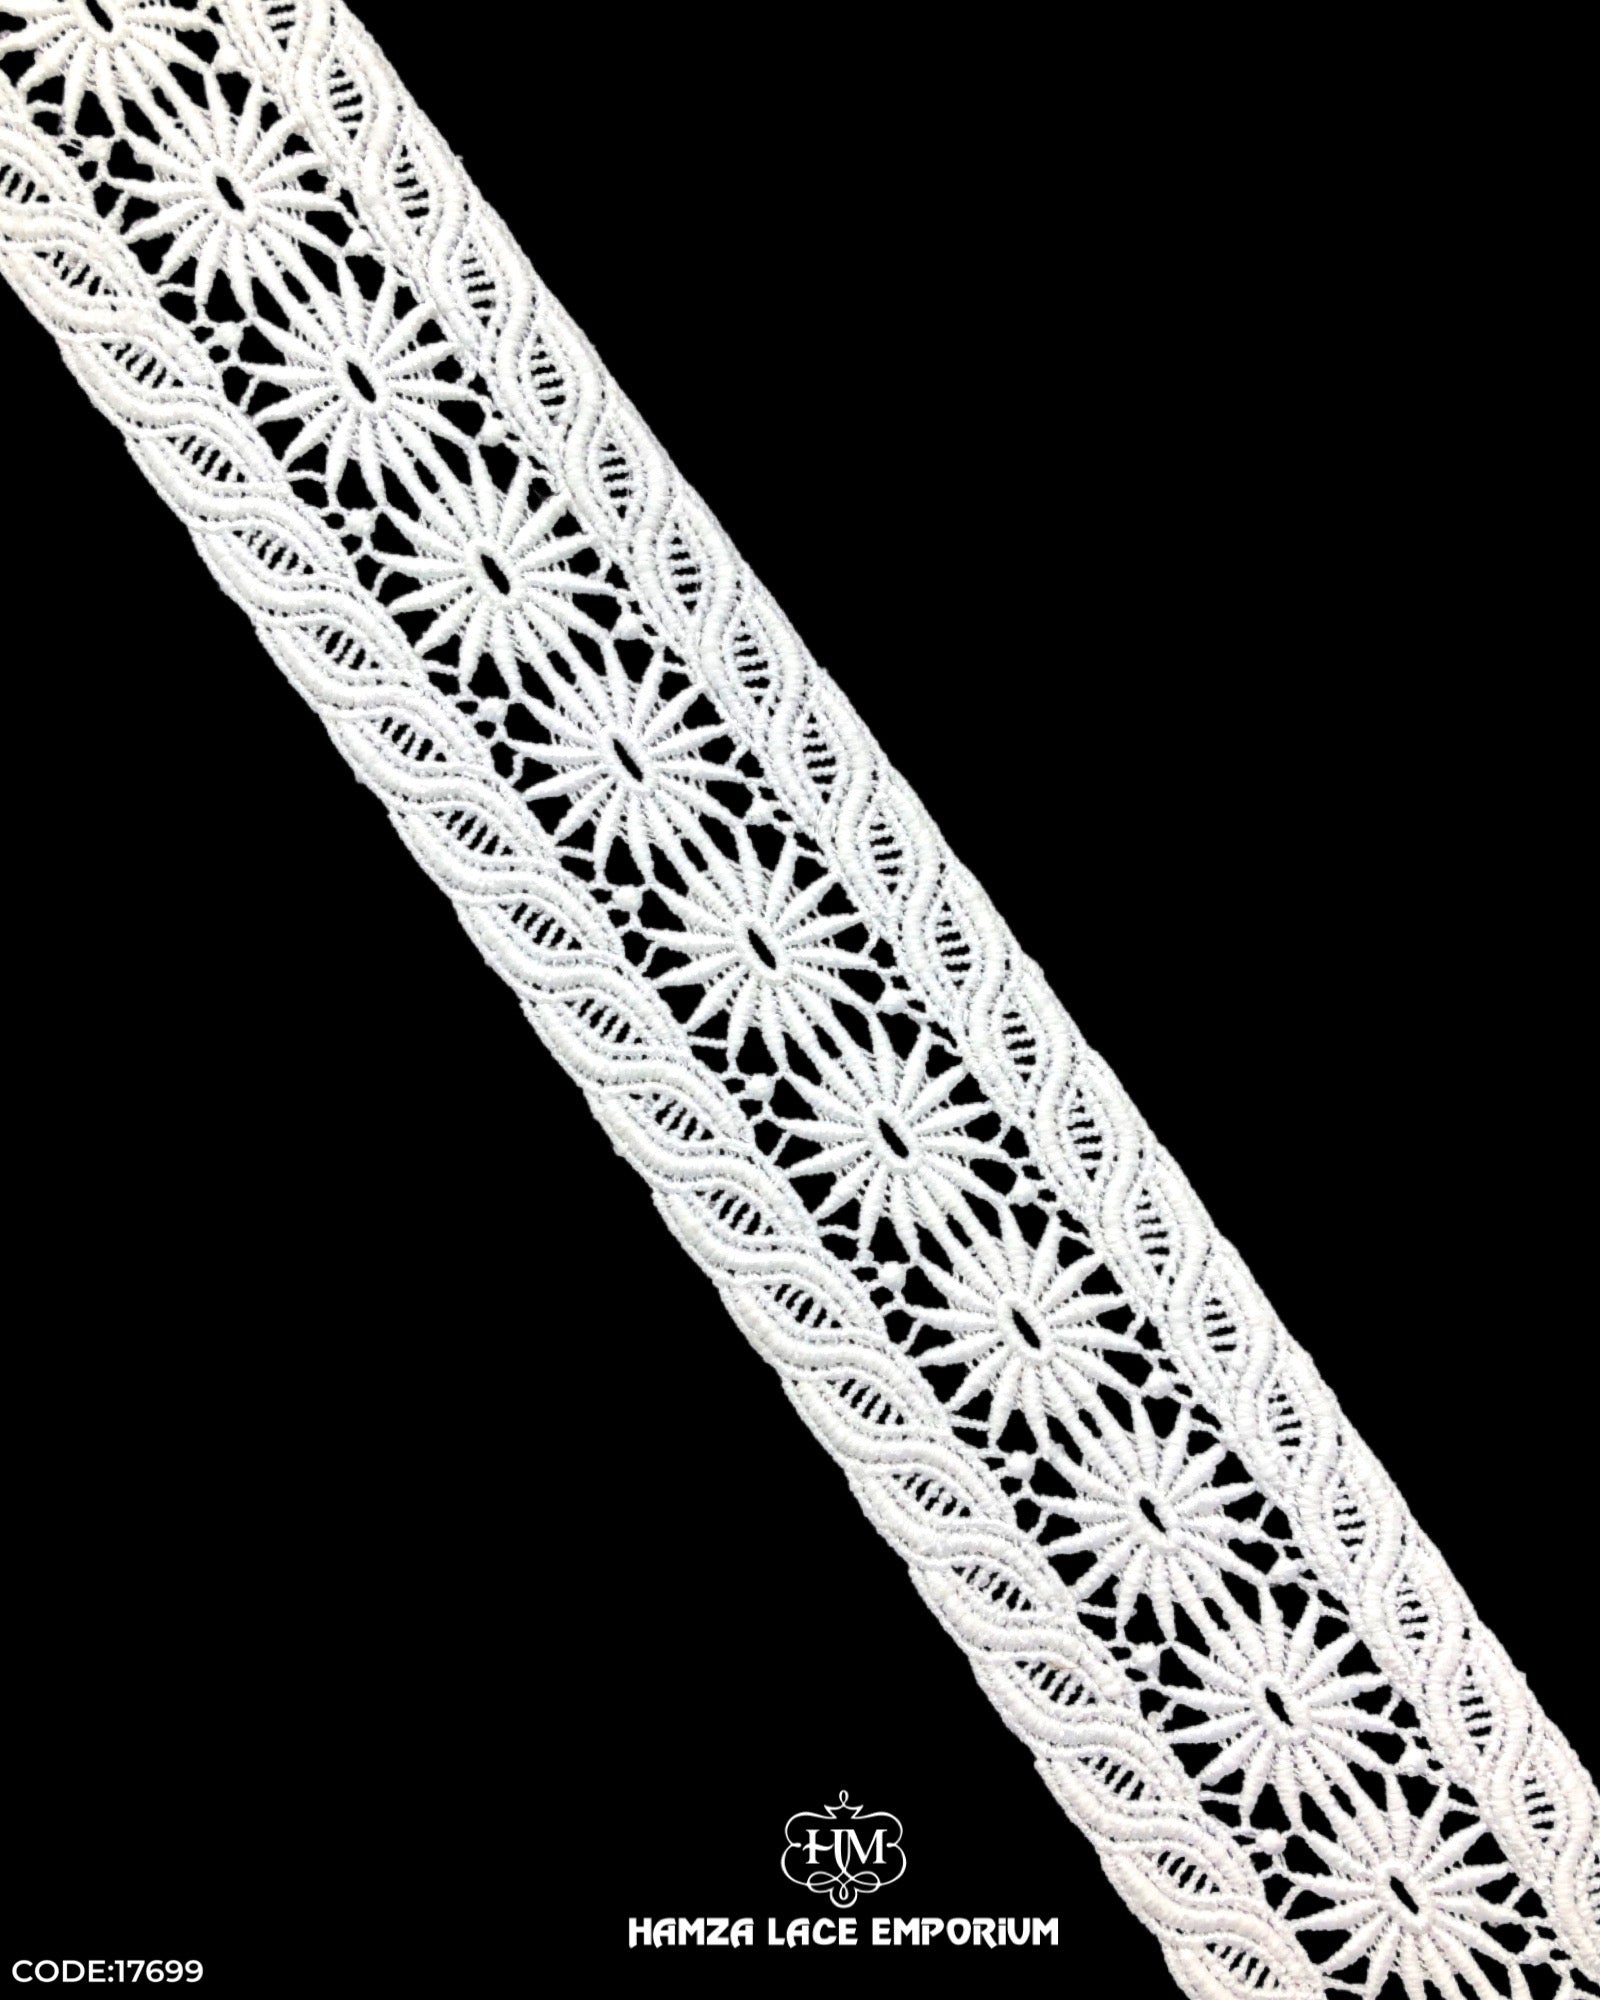 'Center Filling Design Lace 17699' with 'Hamza Lace' Sign at the bottom